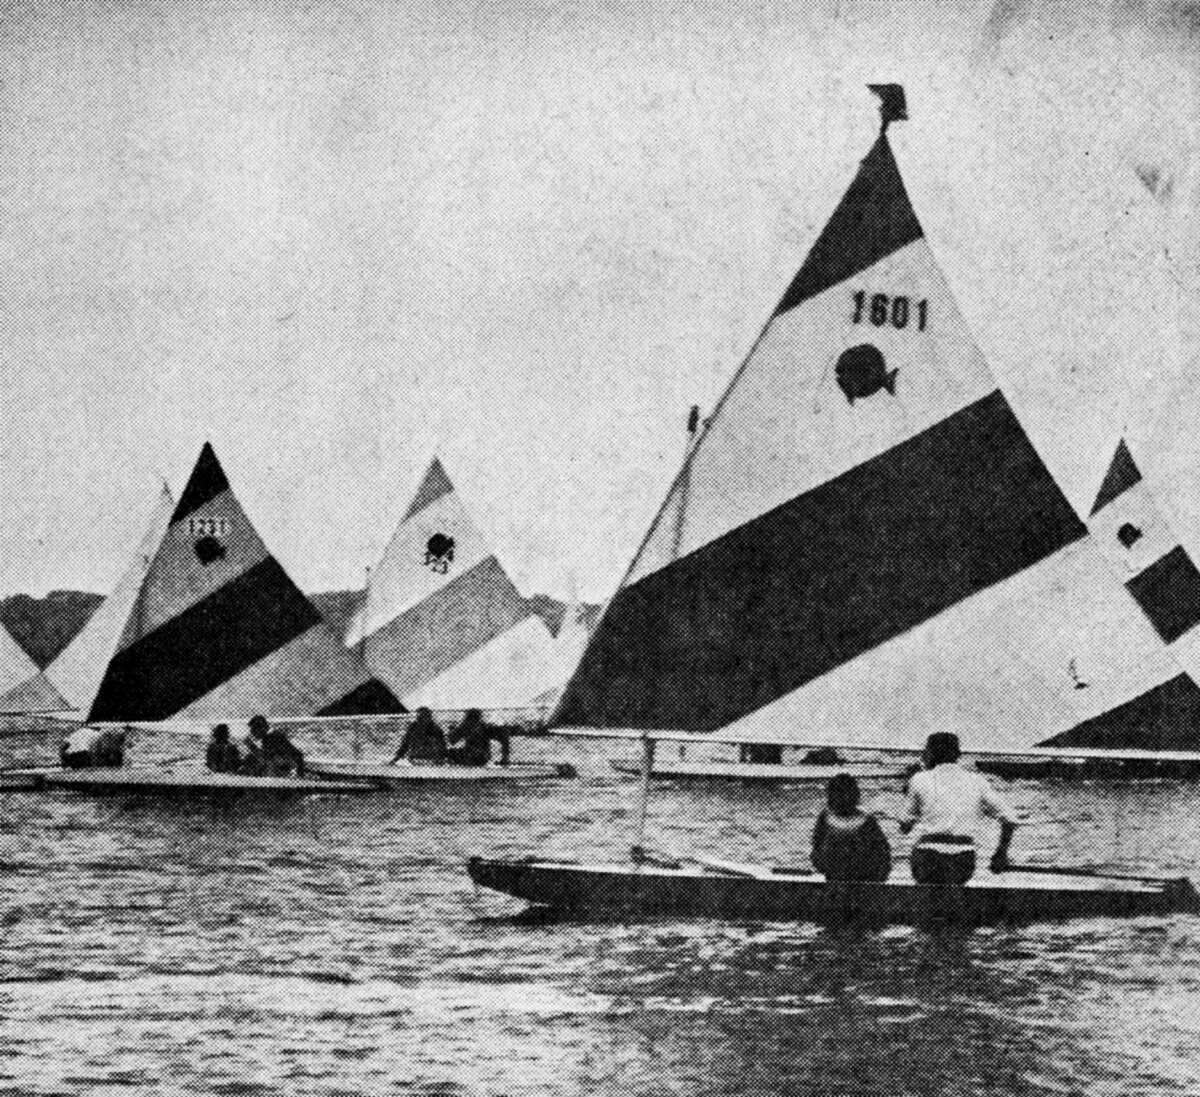 Over the weekend the Michigan championships for Sunfish and Sailfish sailboats were hosted on Manistee Lake Saturday and at Portage Lake on Sunday. In all, 38 boats took part in the four races with the two classes racing separately. The photo was published in the News Advocate on Aug. 6, 1962.